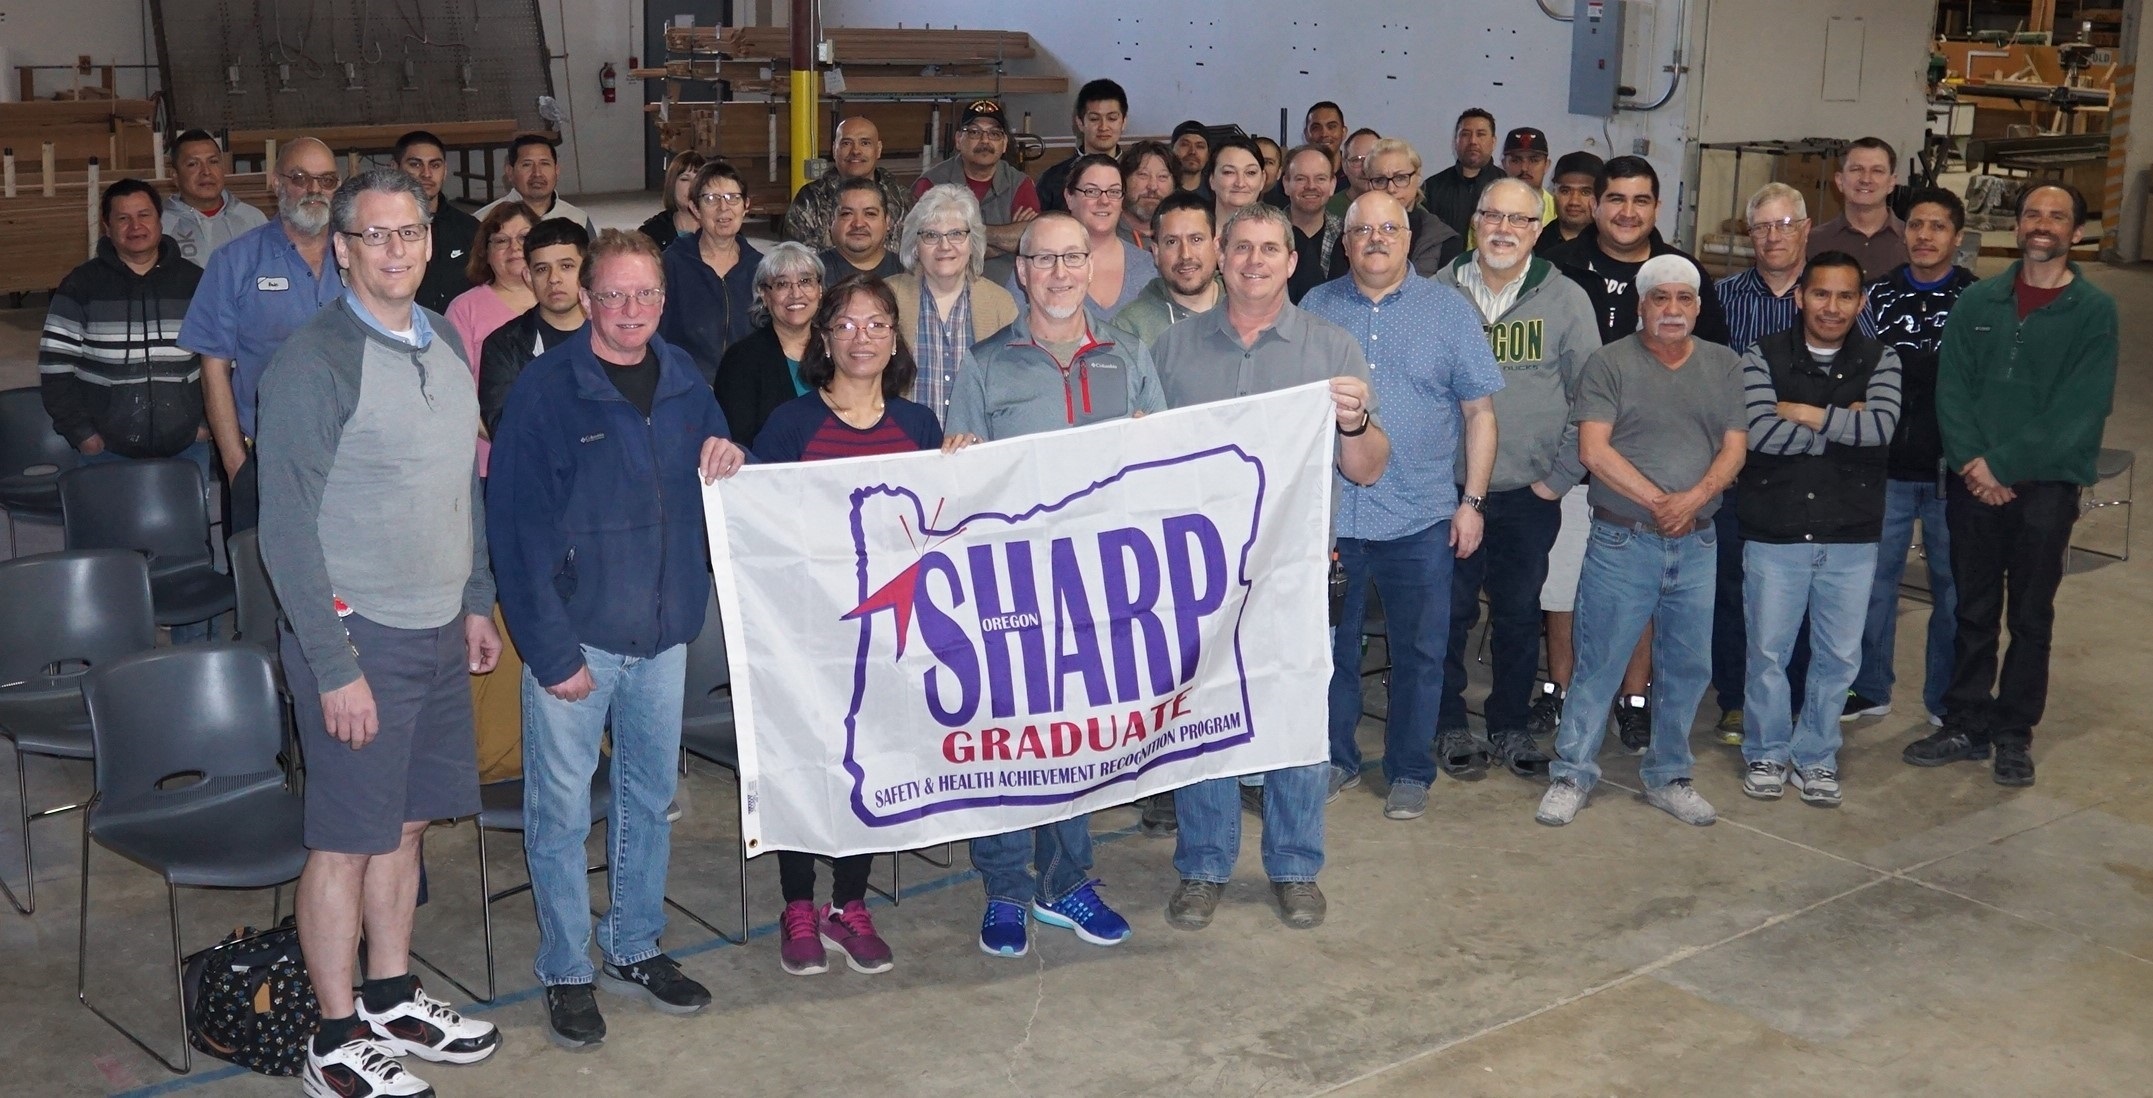 Employees of Woodfold Manufacturing, Inc., a SHARP Alliance Graduate